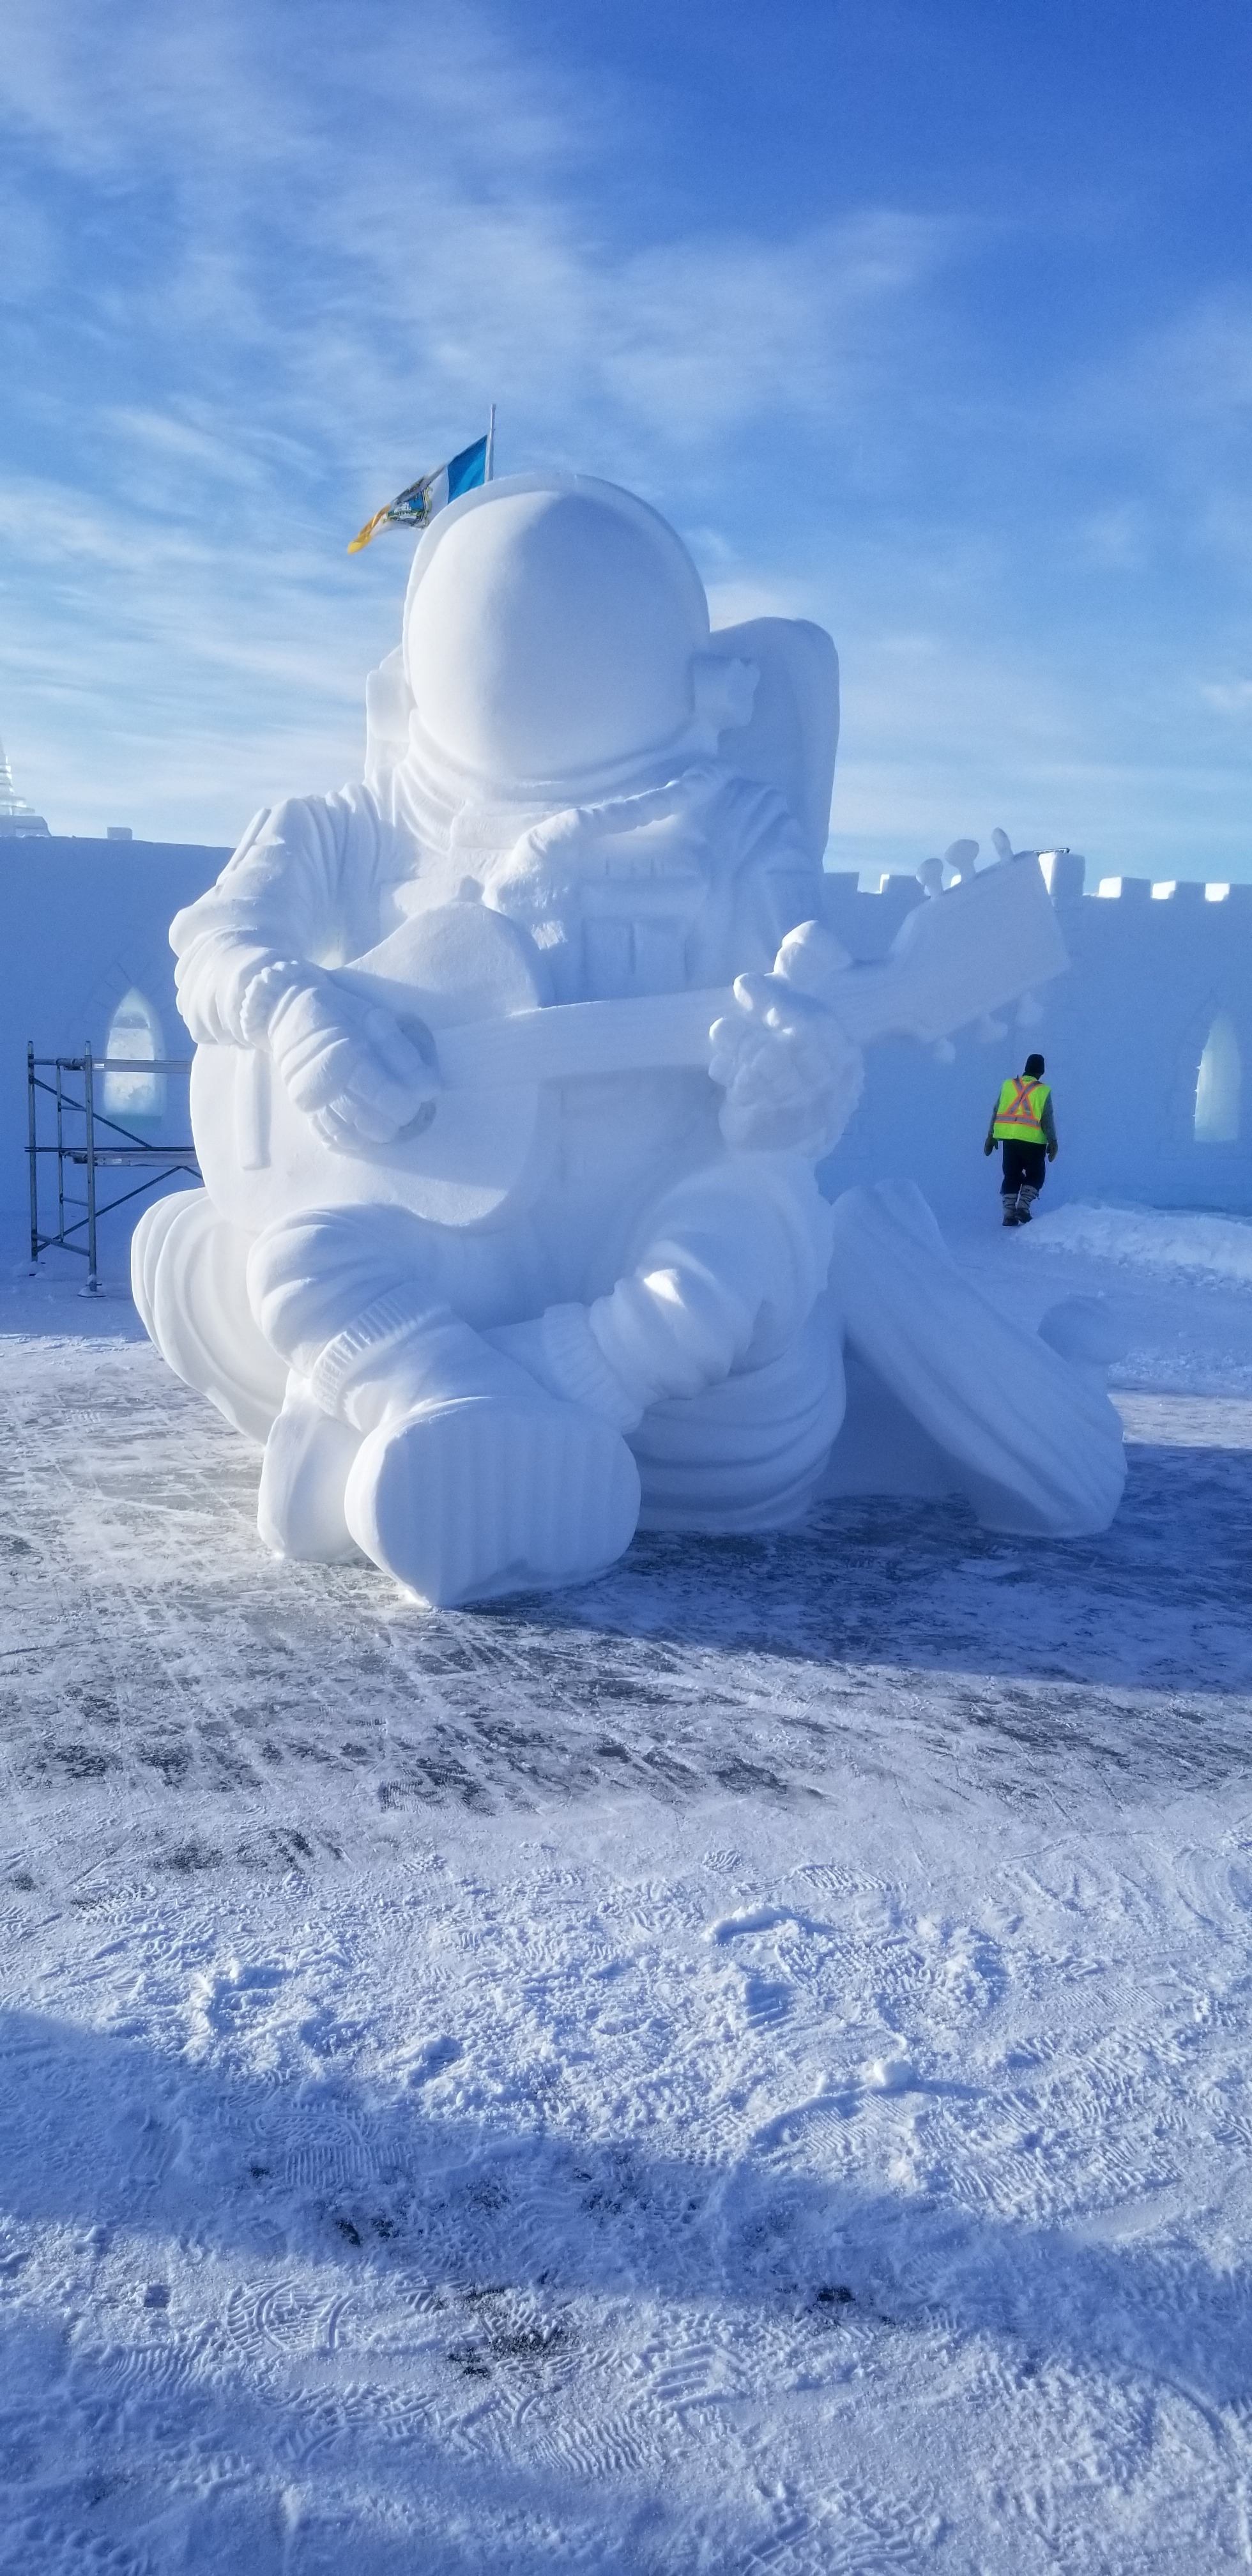 Snowking Winter Festival, Yellowknife Bay on the shores of Great Slave Lake, Old Town (late February)